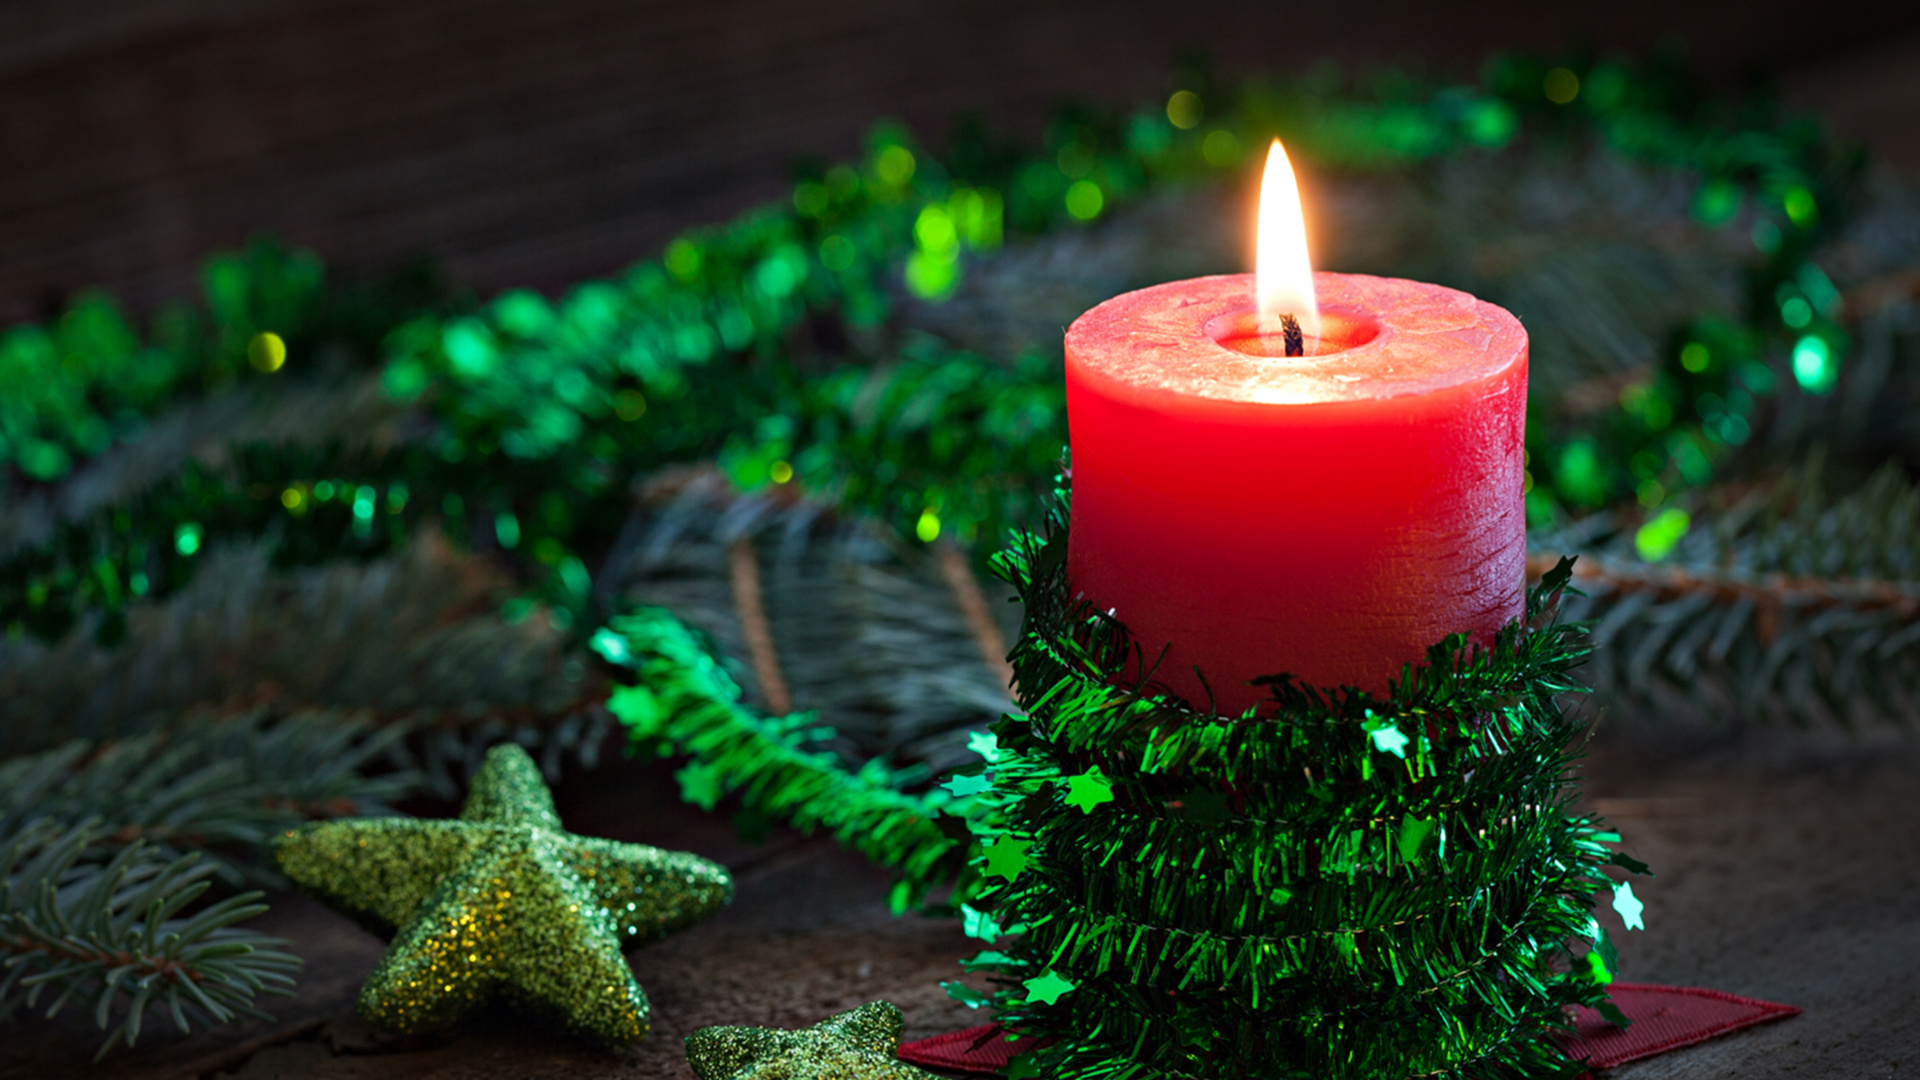 Candle, Green, Lighting, Christmas, Tree. Wallpaper in 1920x1080 Resolution